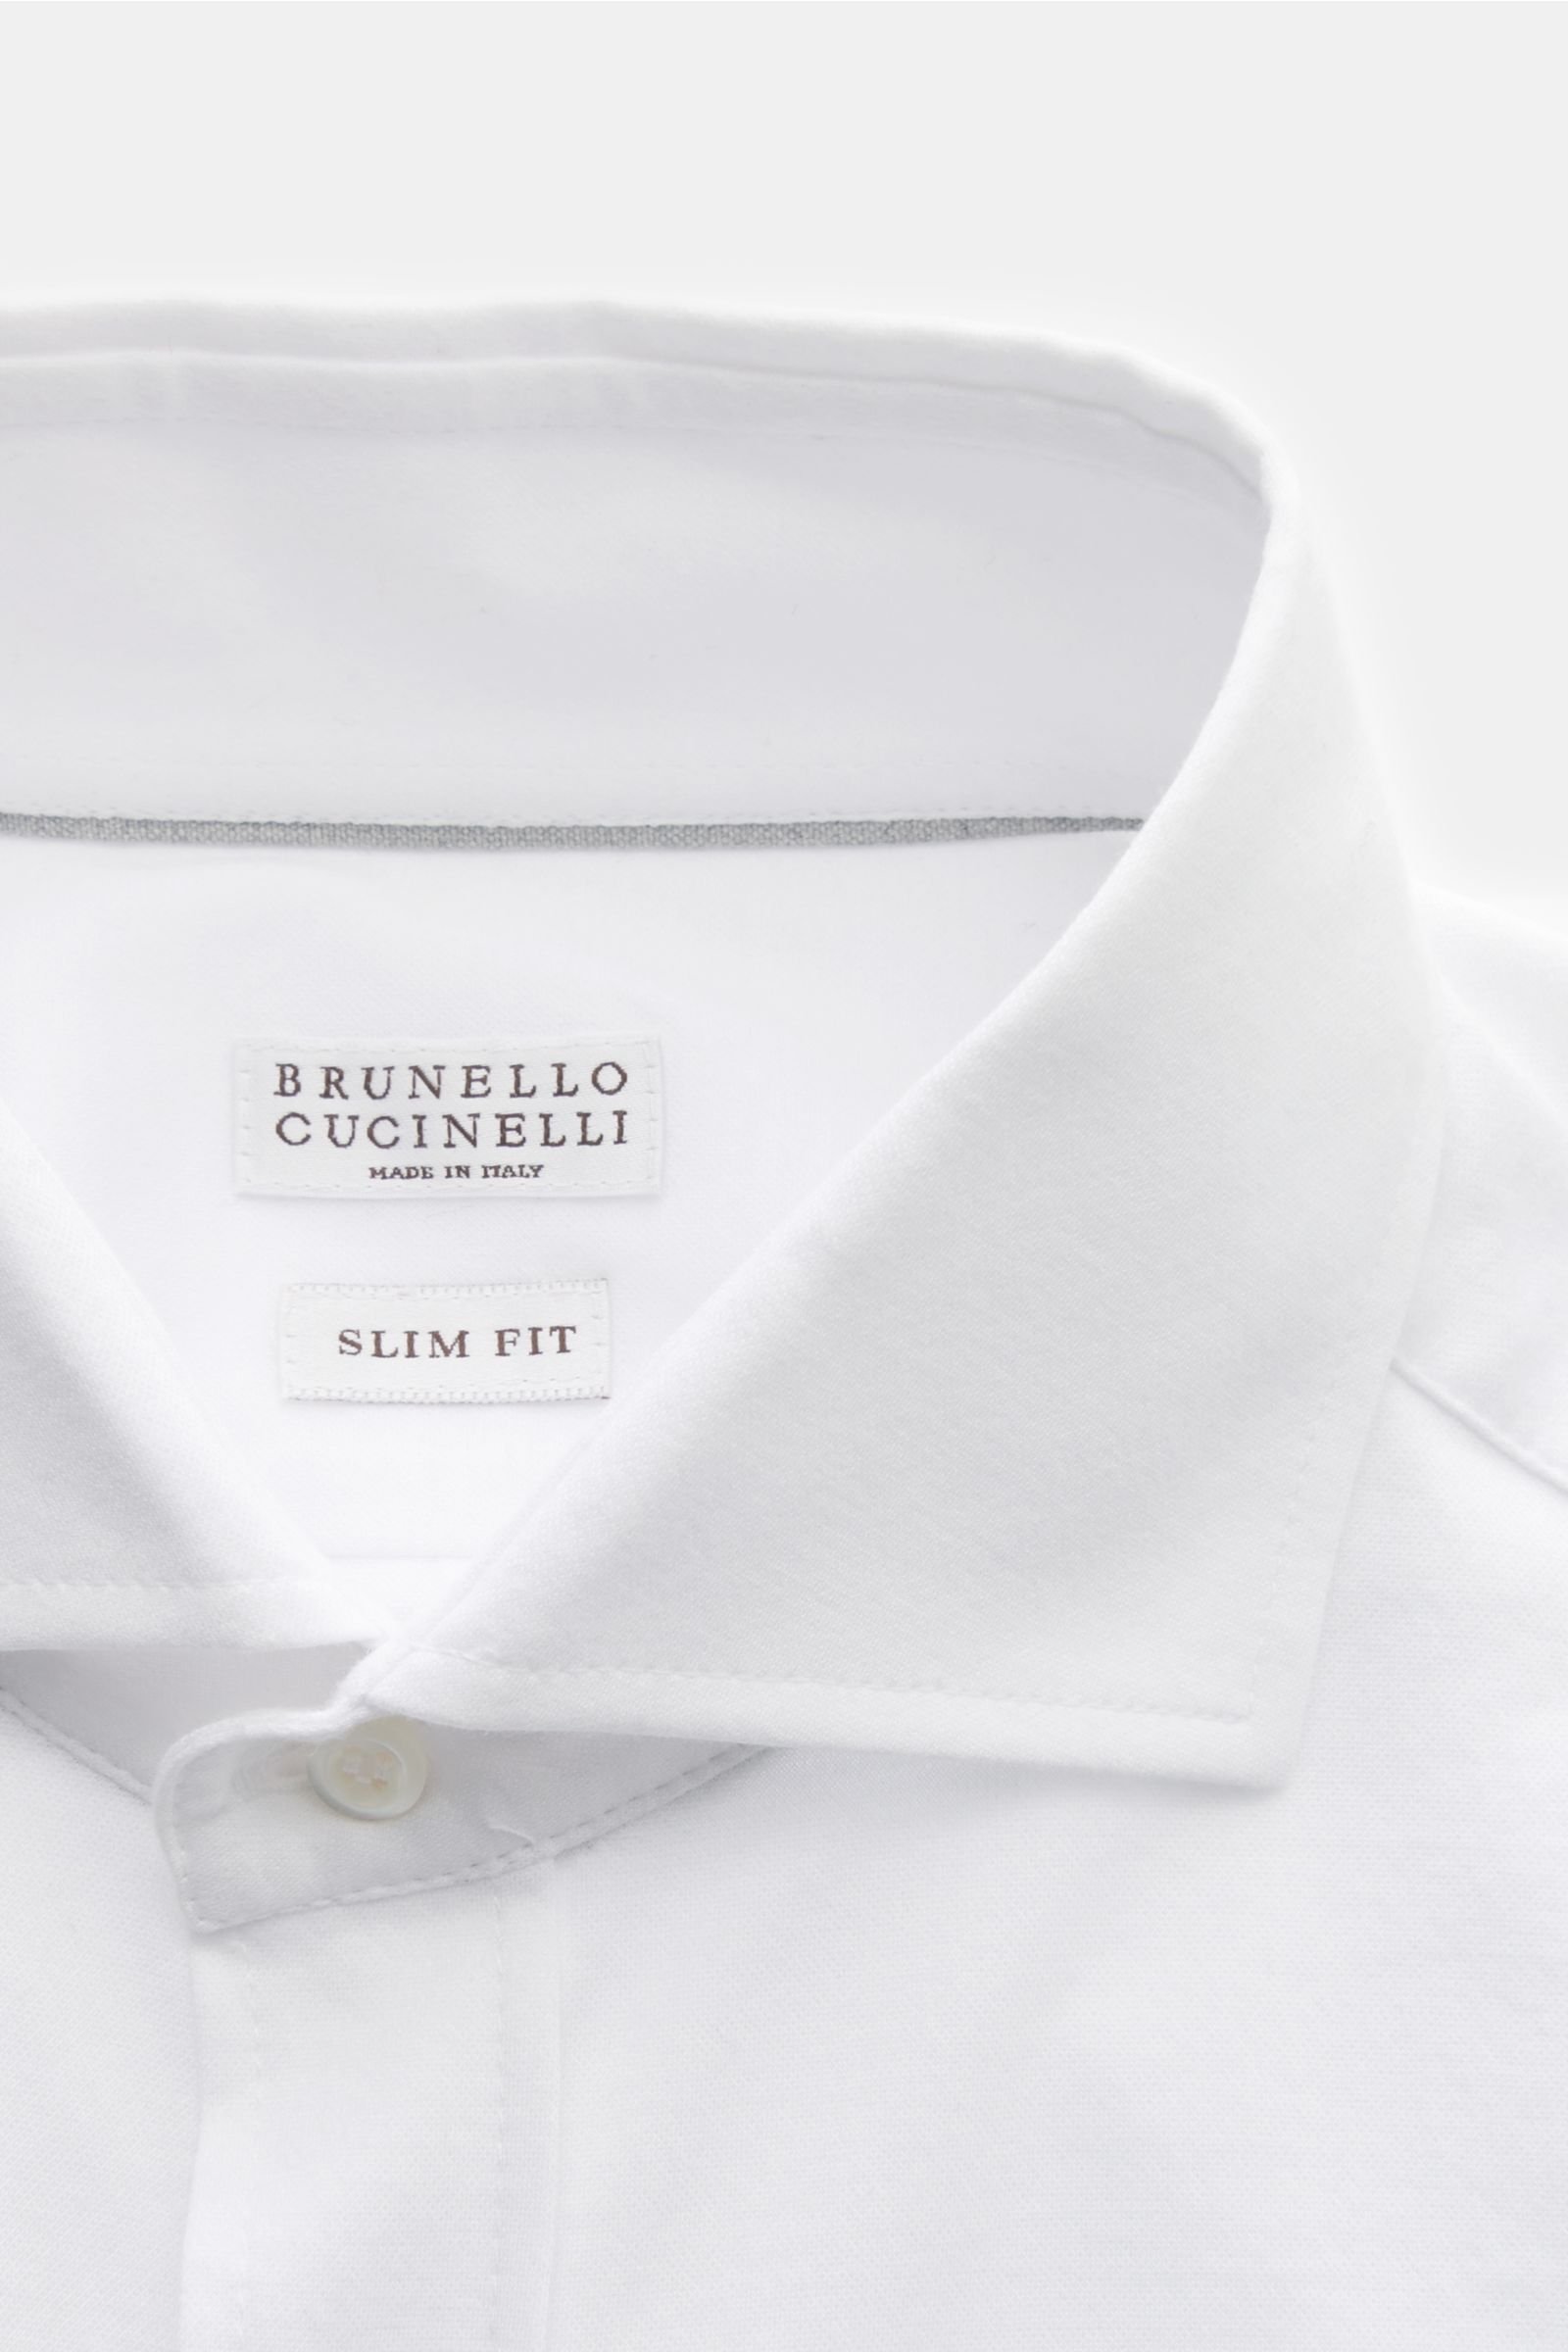 Brunello Cucinelli Cotton Classic Shirt in White for Men Mens Clothing Shirts Casual shirts and button-up shirts 